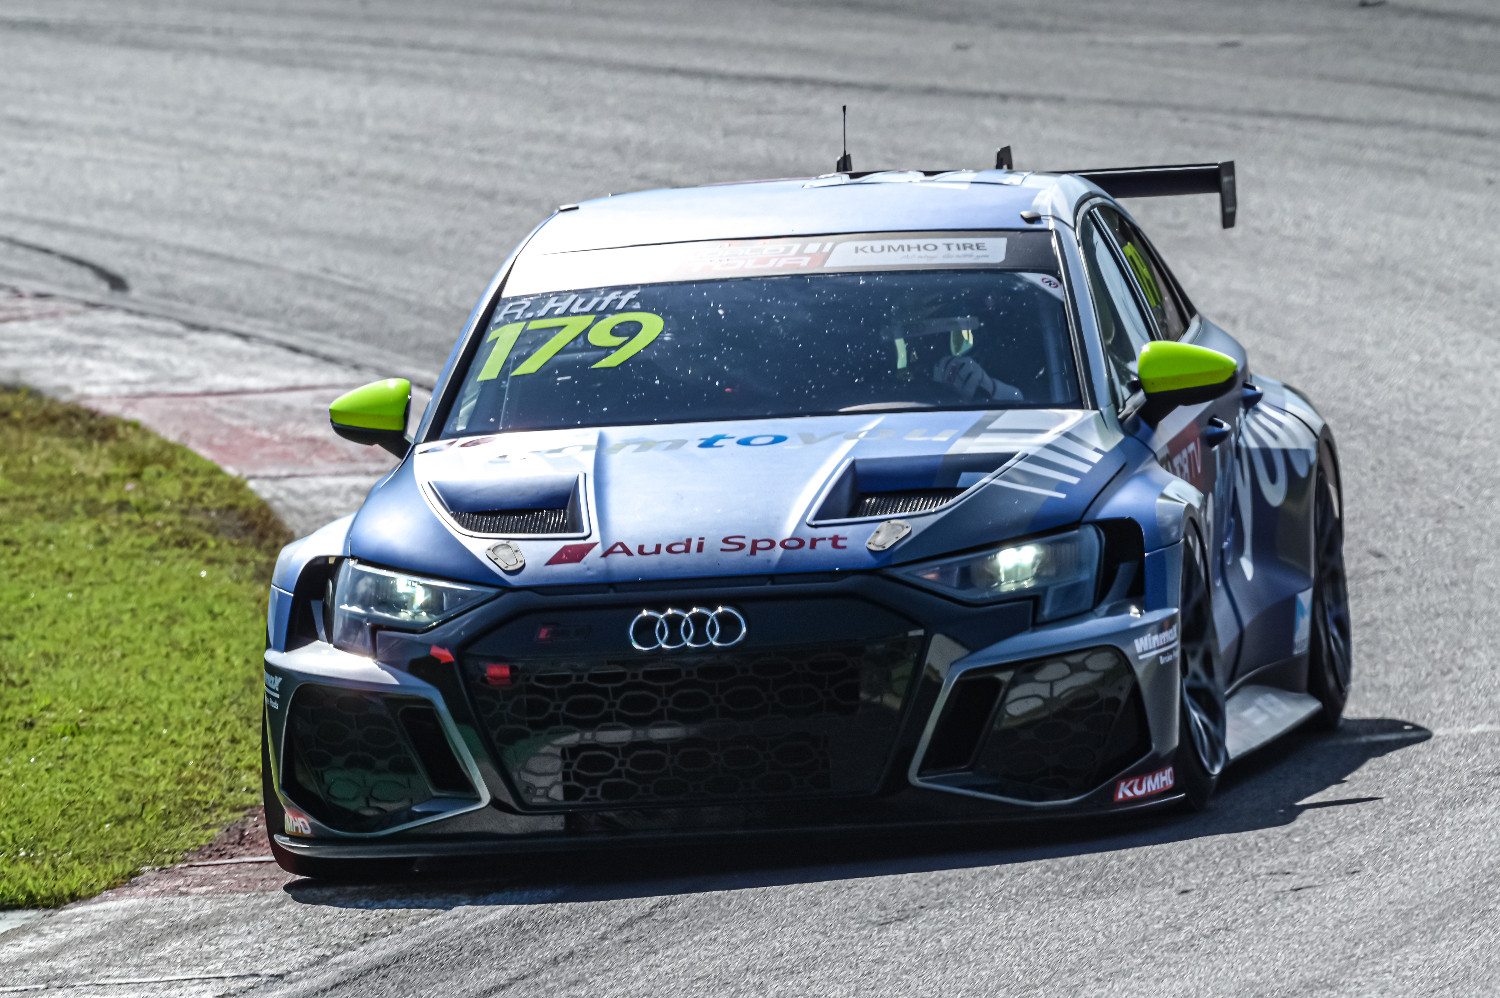 Rob Huff wins while rivals collide at Vallelunga in TCR World Tour Race ...